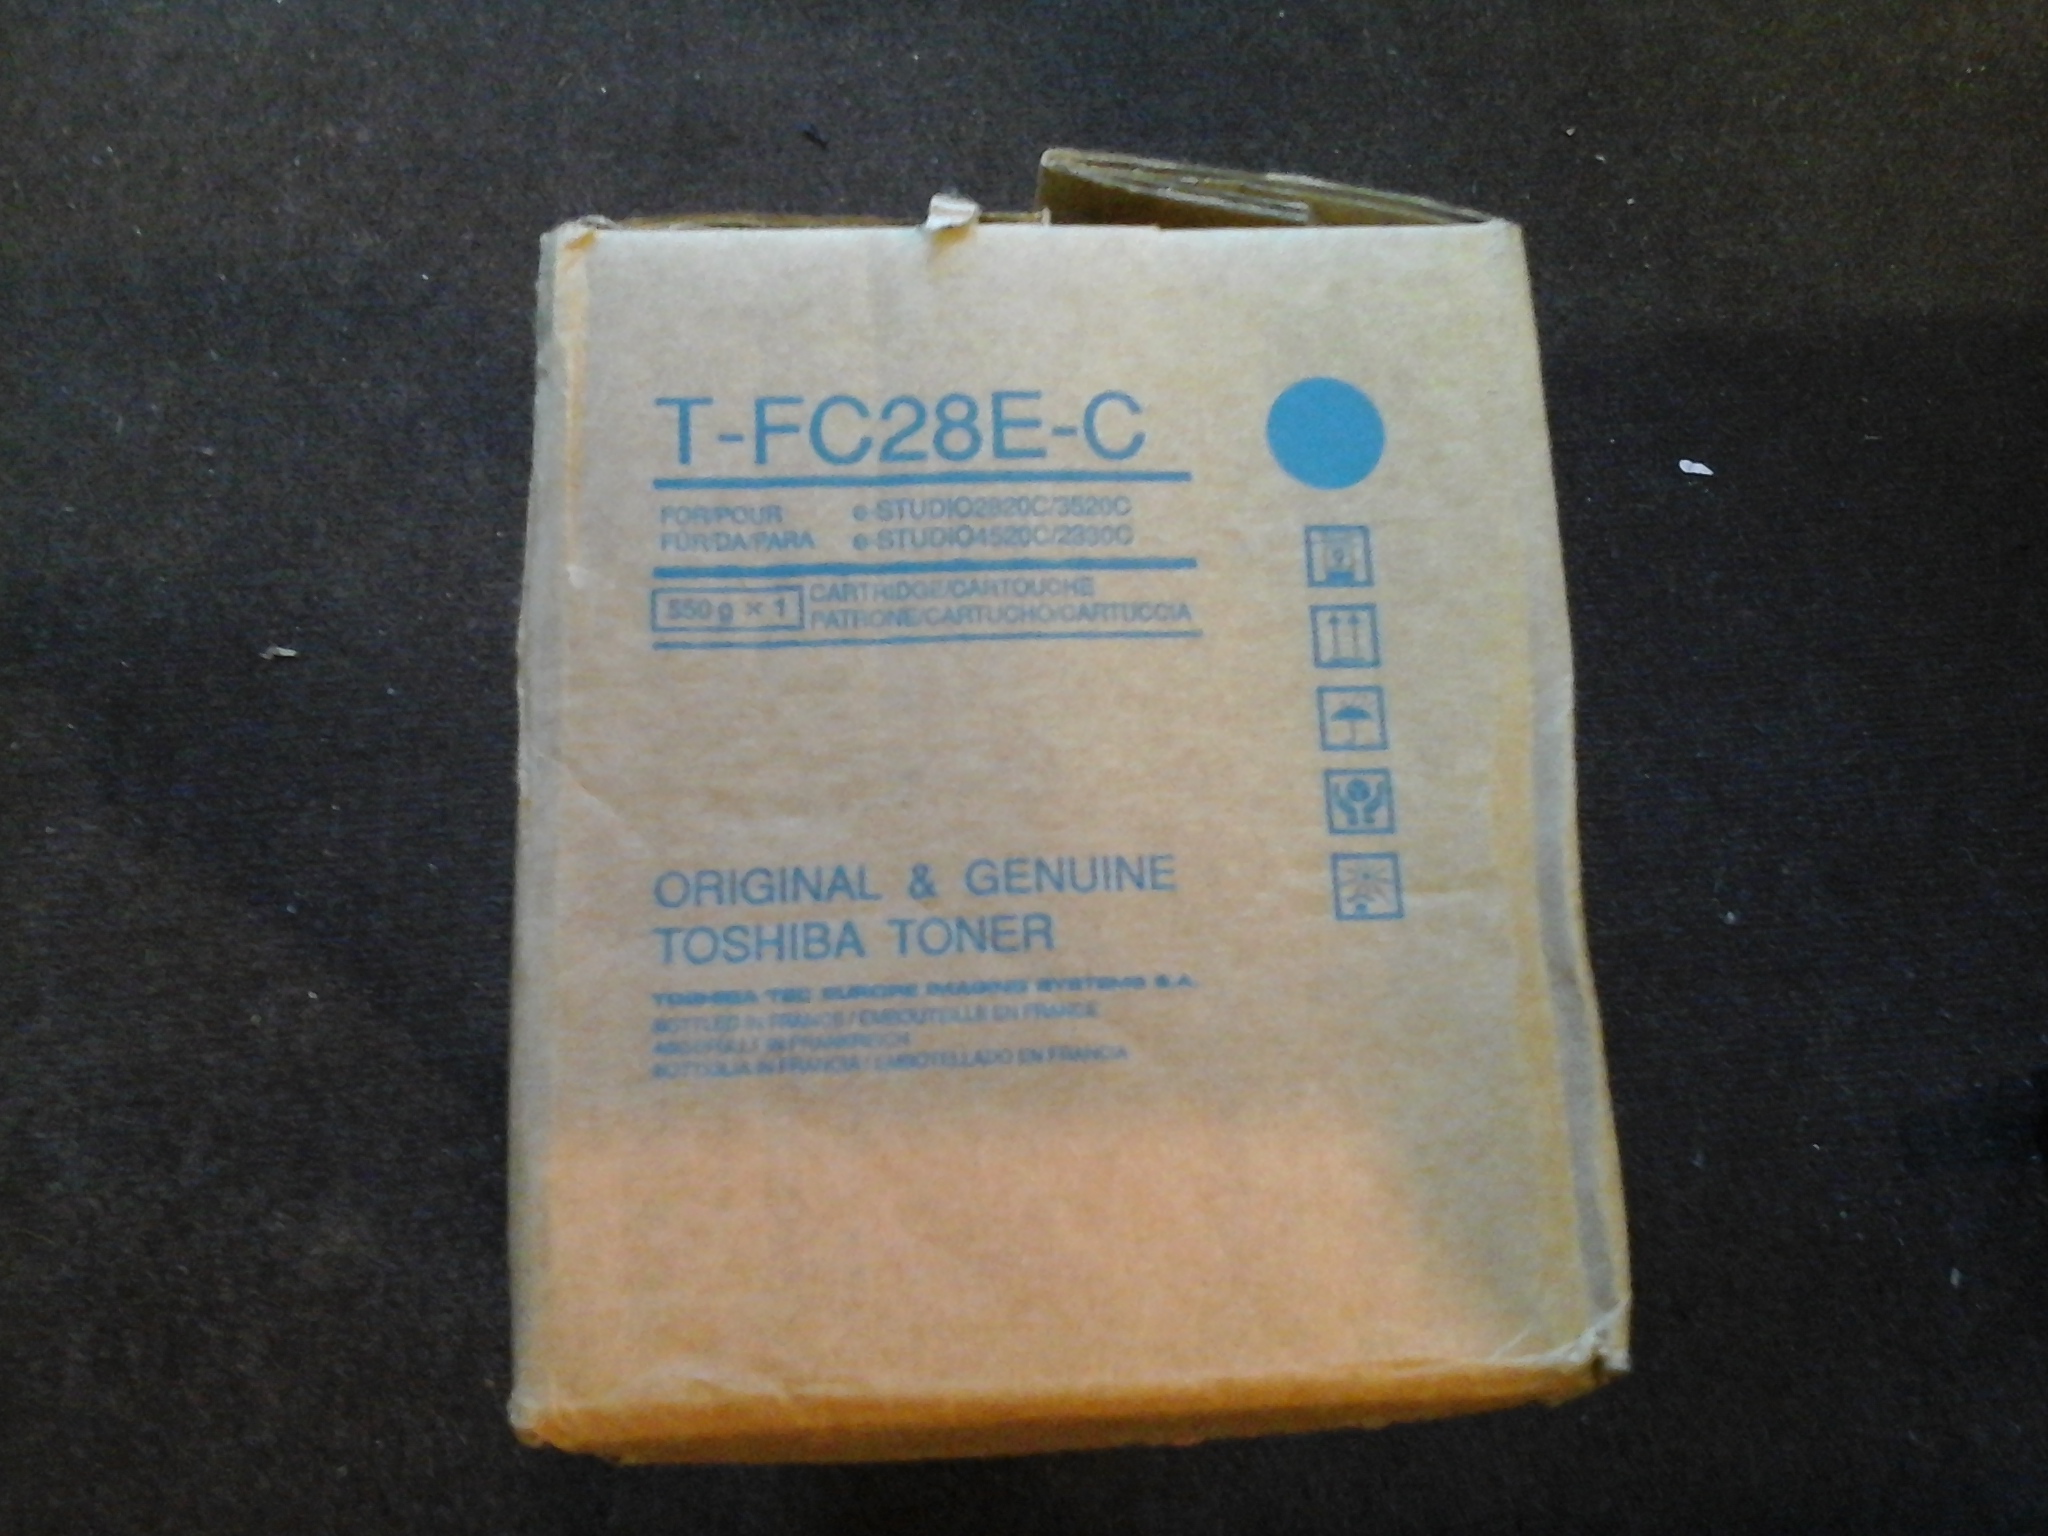 Genuine Toshiba Toner Cartridge T-FC28E-C Cyan Open VAT Included - Picture 1 of 1